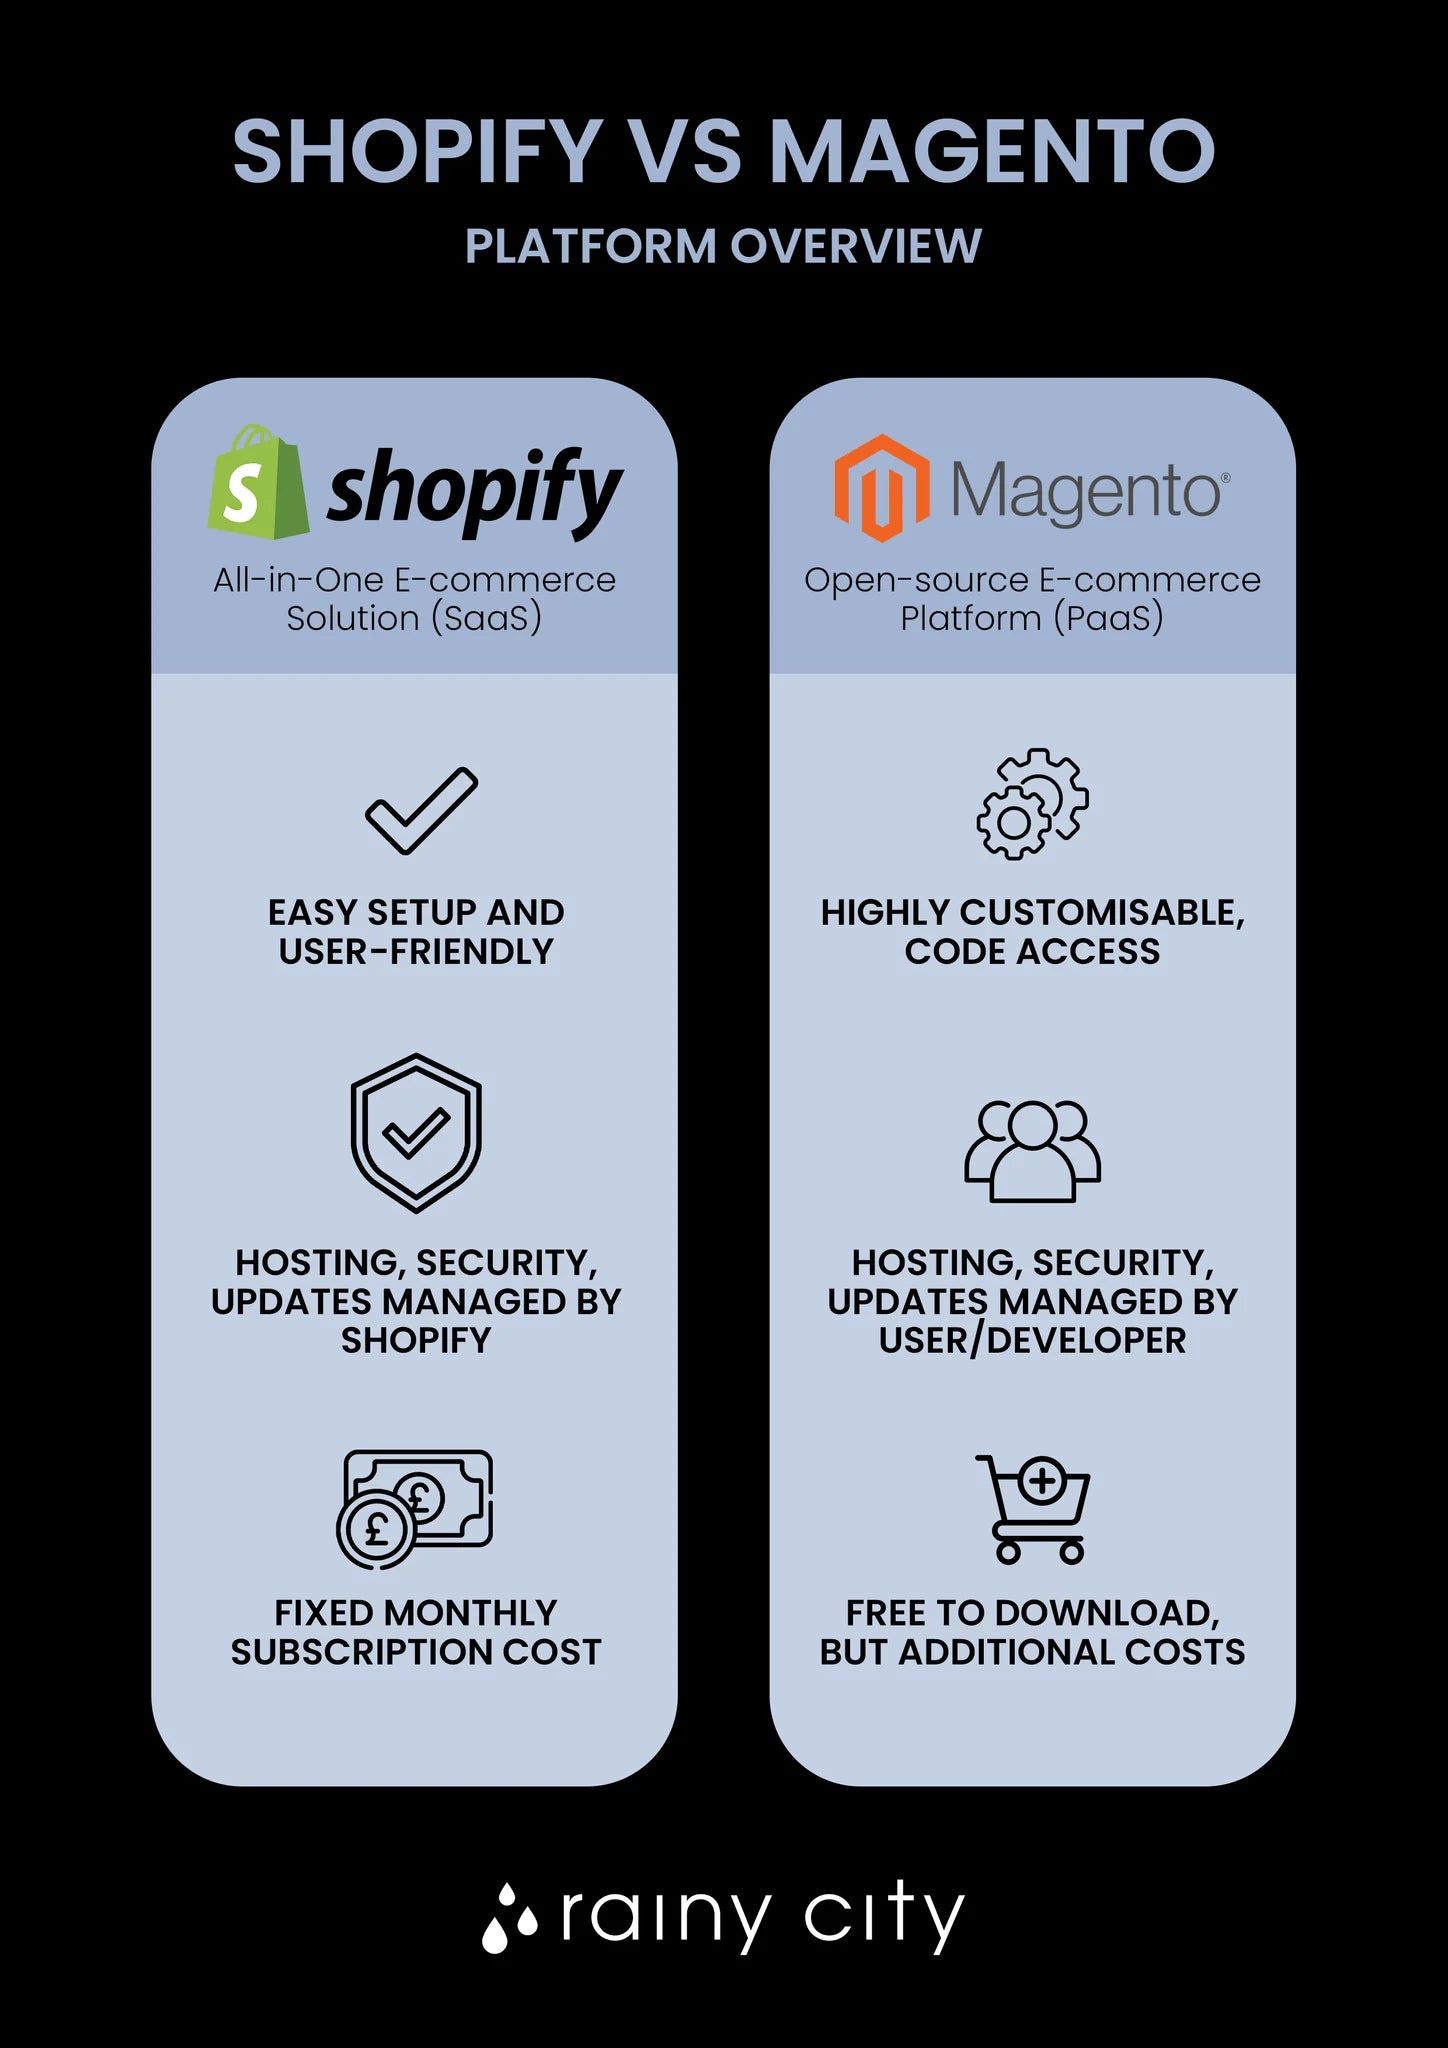 Shopify and Magento Overview